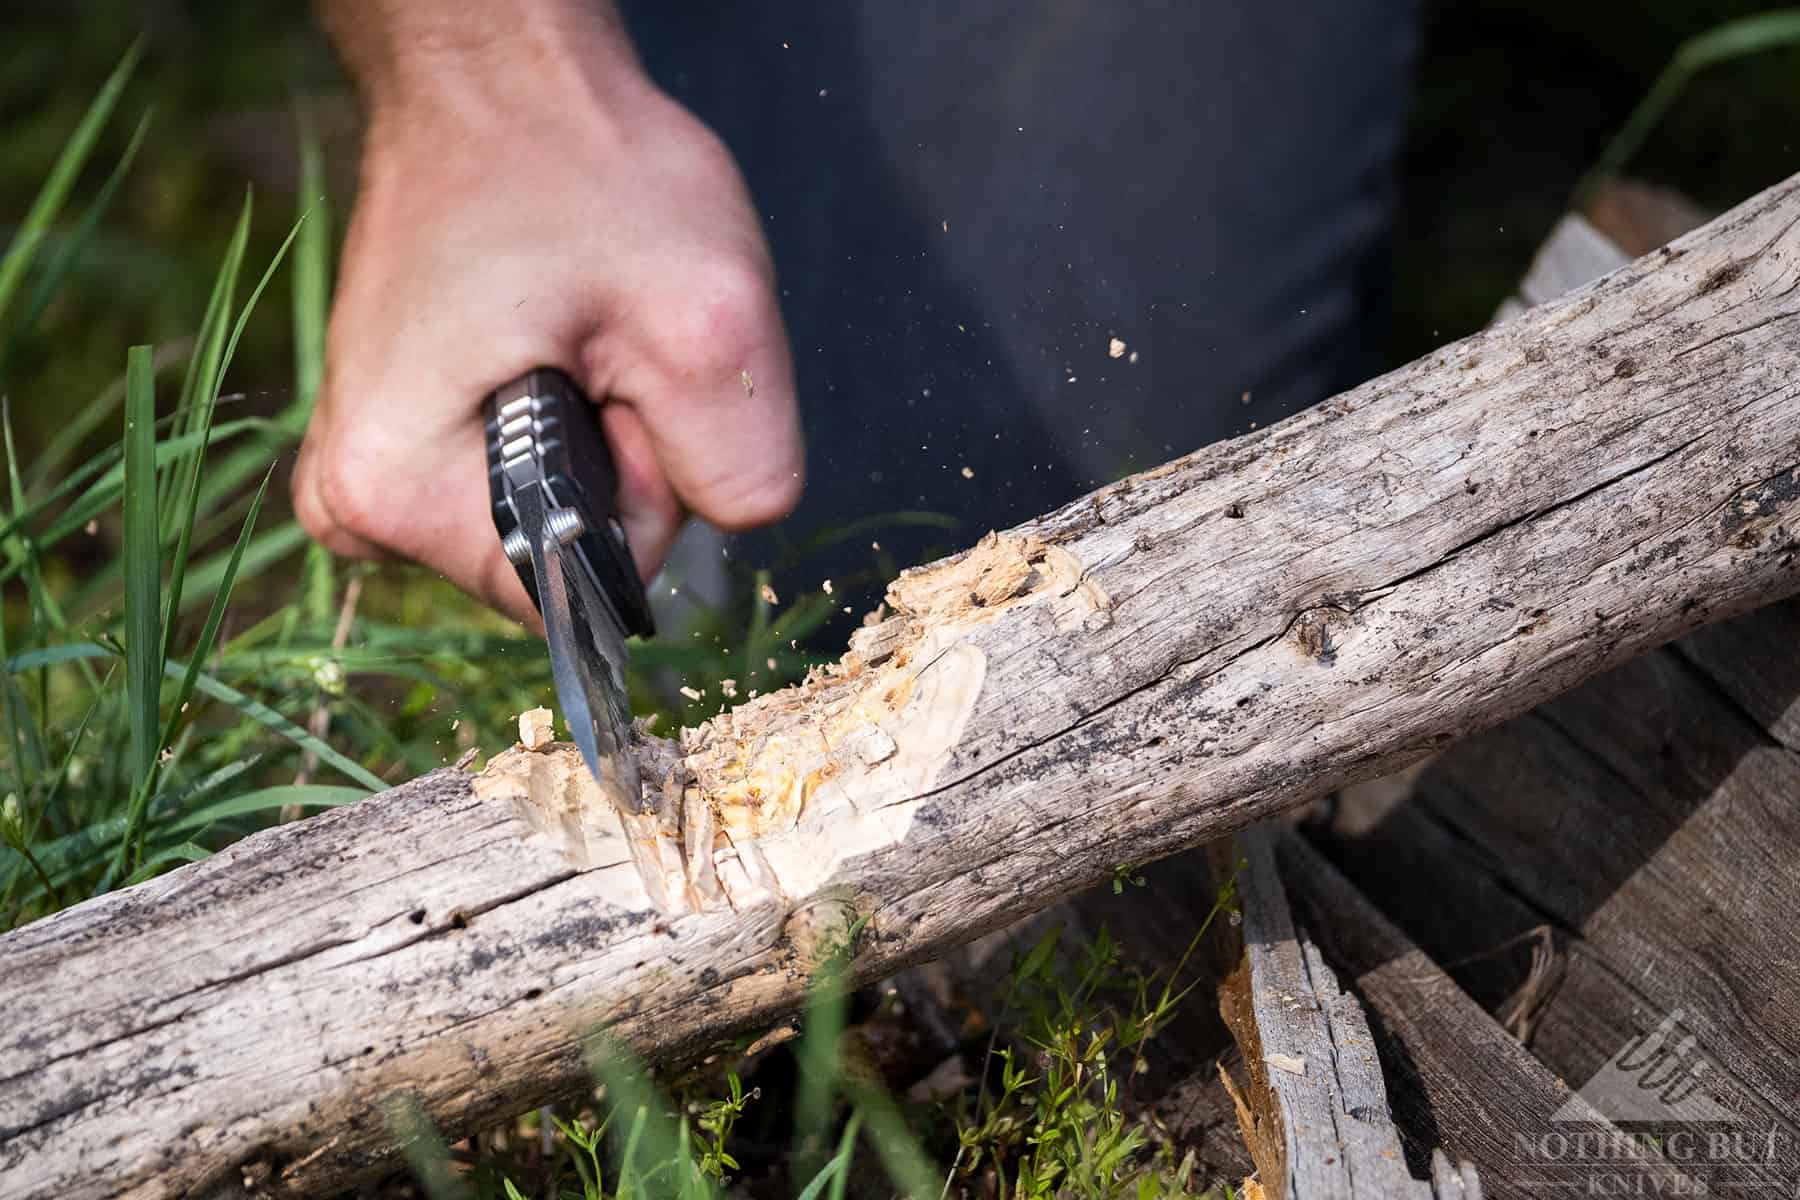 The Tri-Ad lock of the Cold Steel 4 MAX Scout is tough enough to withstand chopping as this image shows.